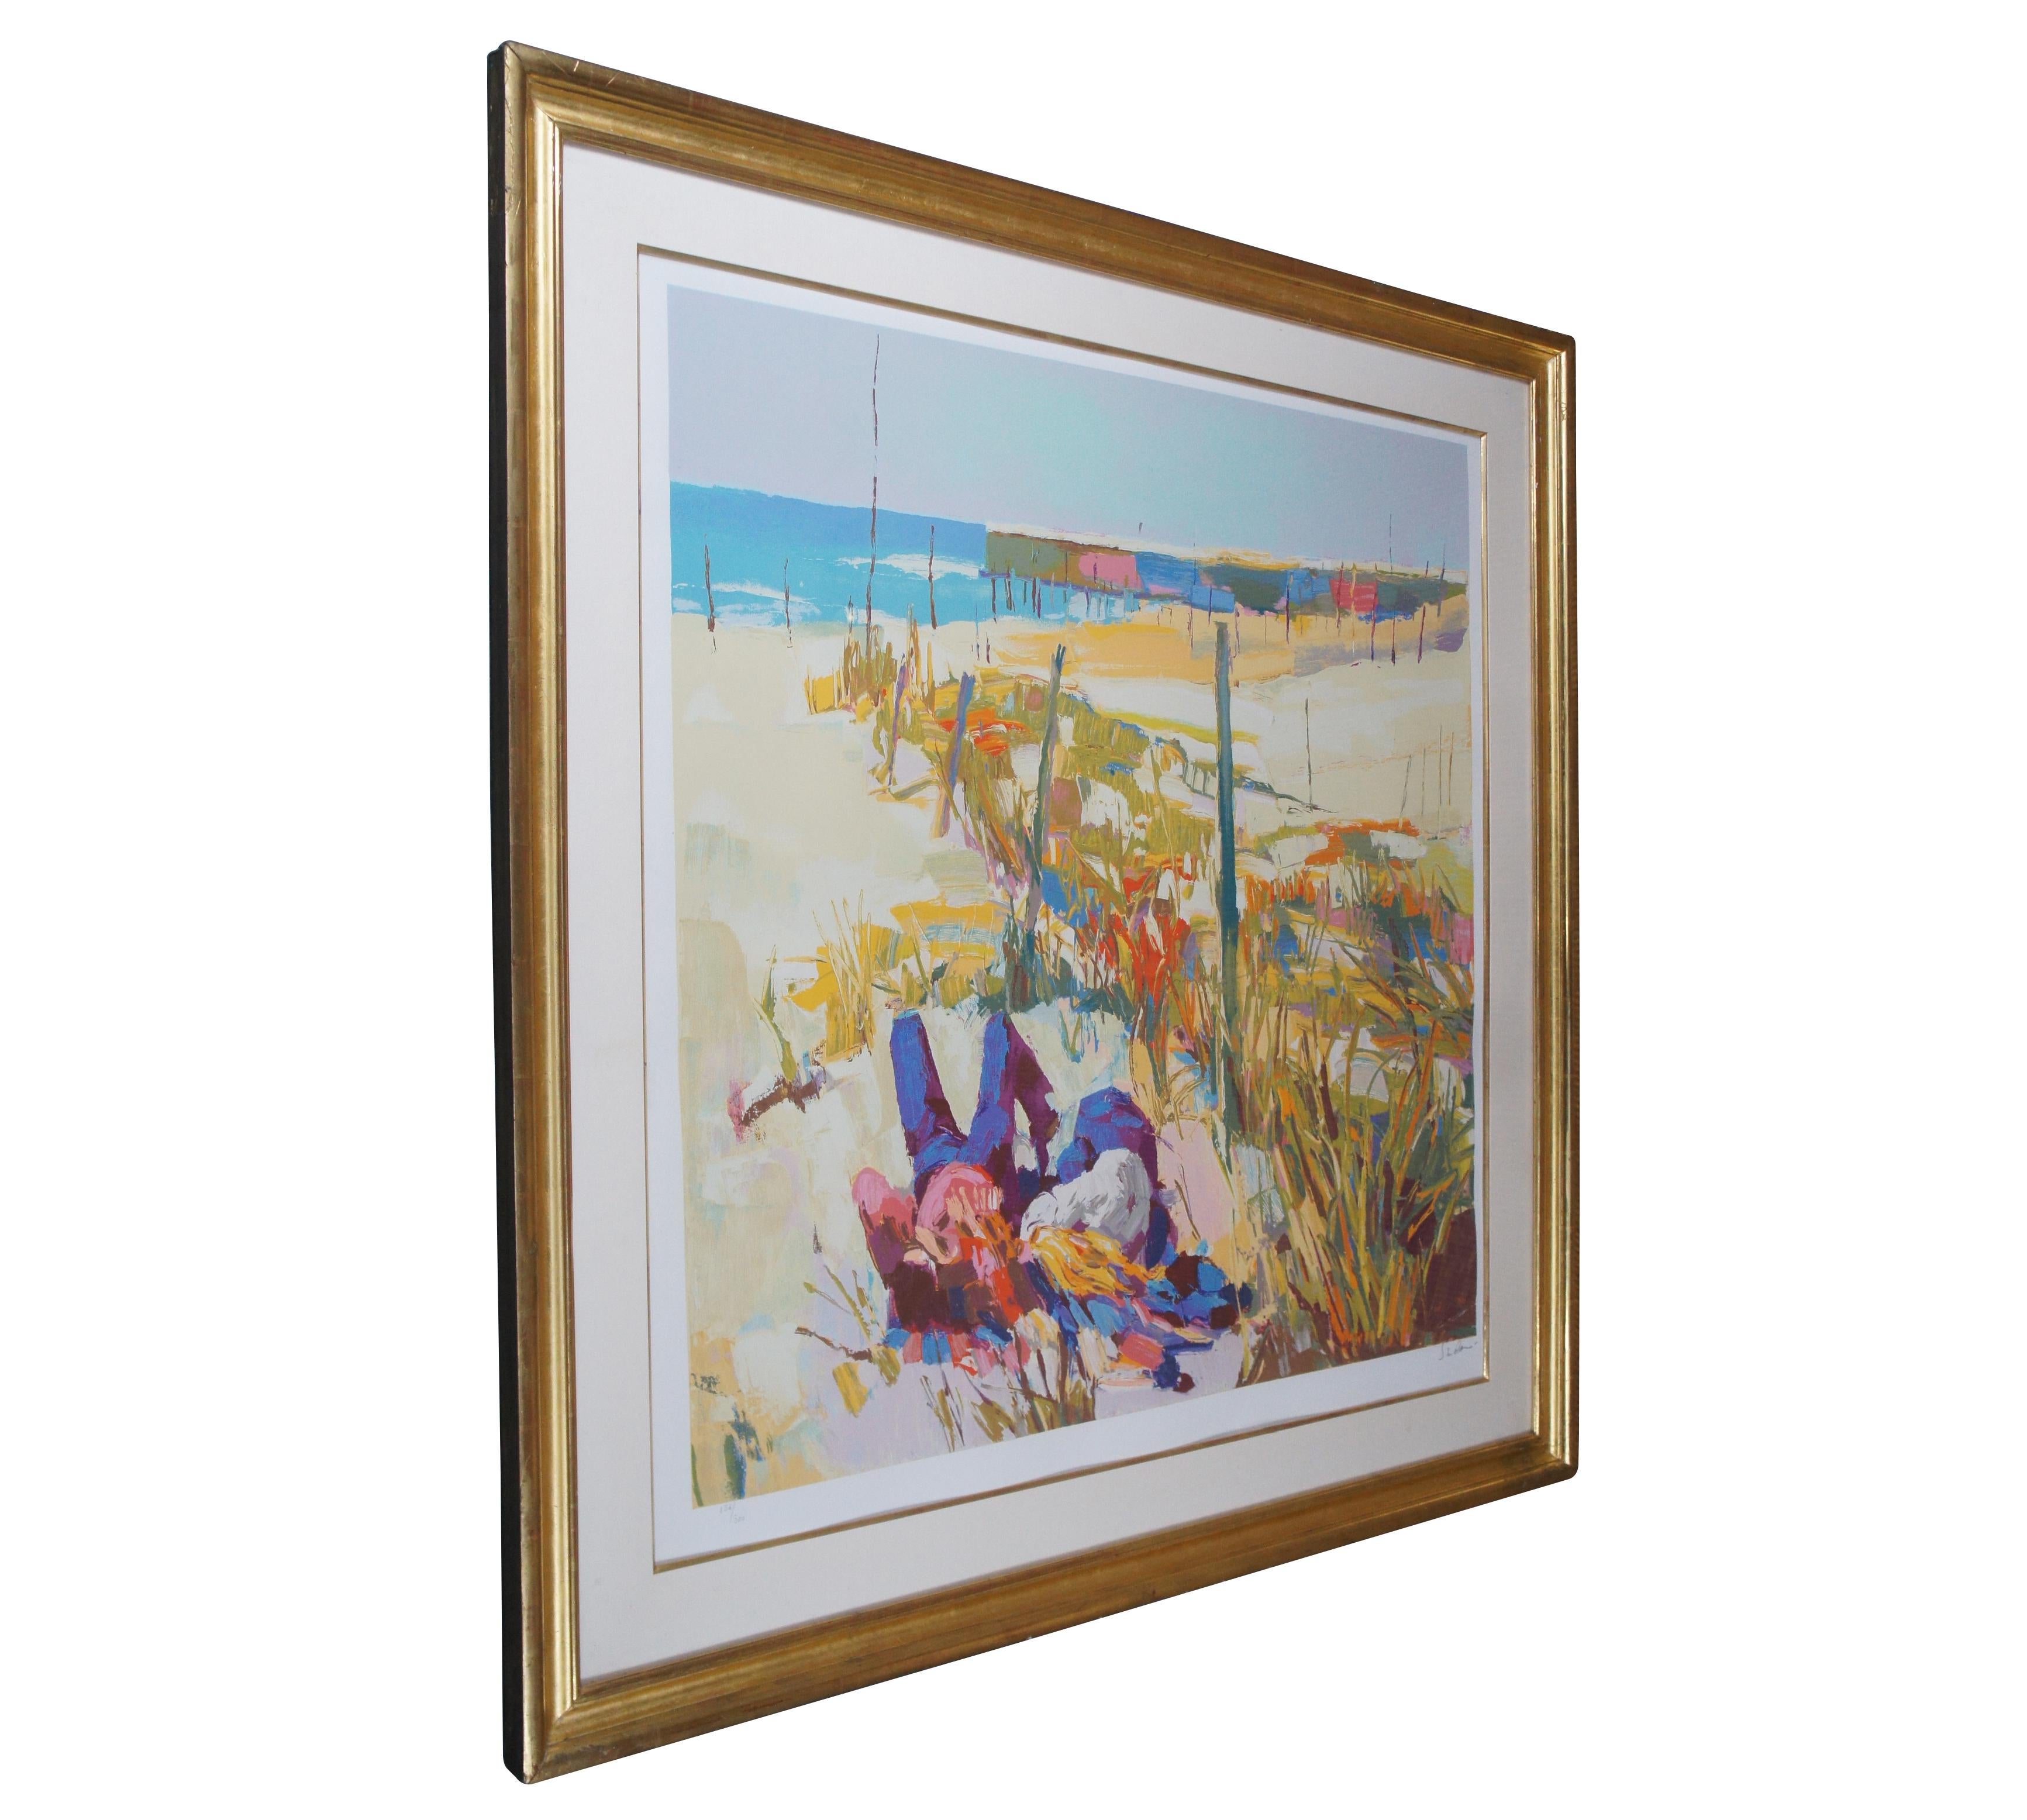 Vintage 1970s limited edition serigraph print by Nicola Simbari, showing a figure of a couple laying at the beach with boats and water in the background; pencil signed and numbered 126/300. “Nicola Simbari is a painter of semi-abstract impressionist